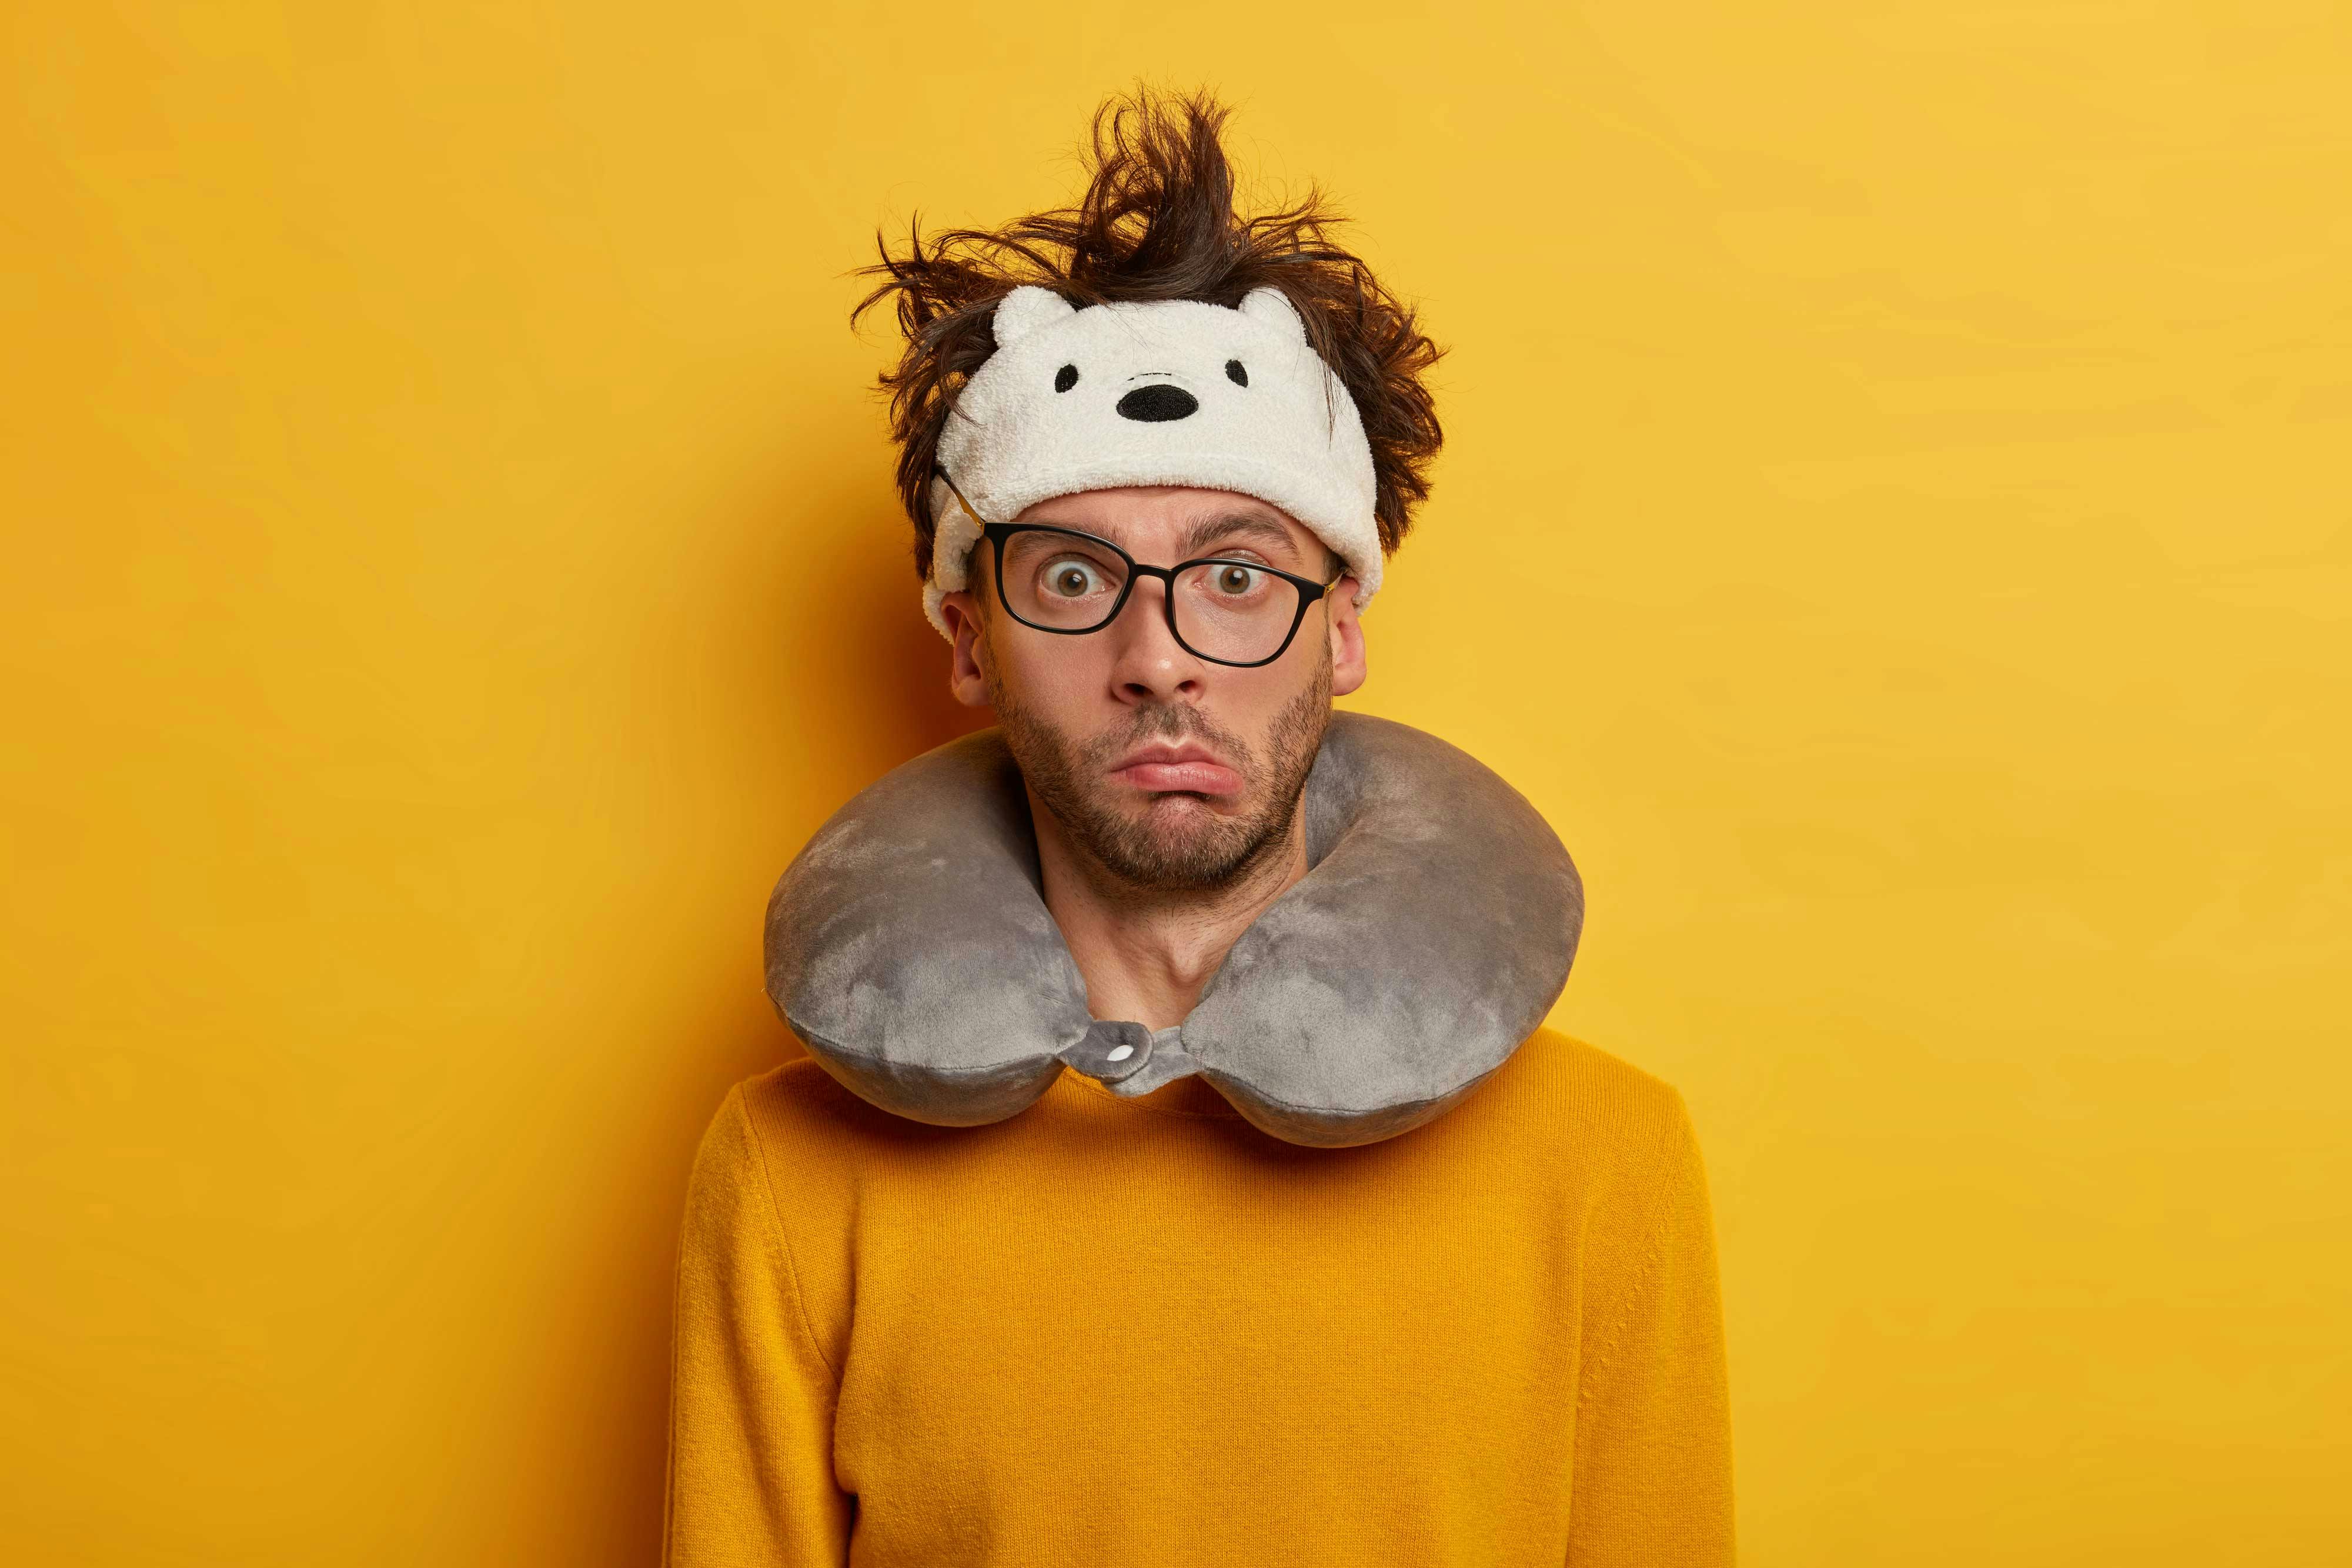 man wearing neck pillow with glasses askew and funny expression against bright yellow wall